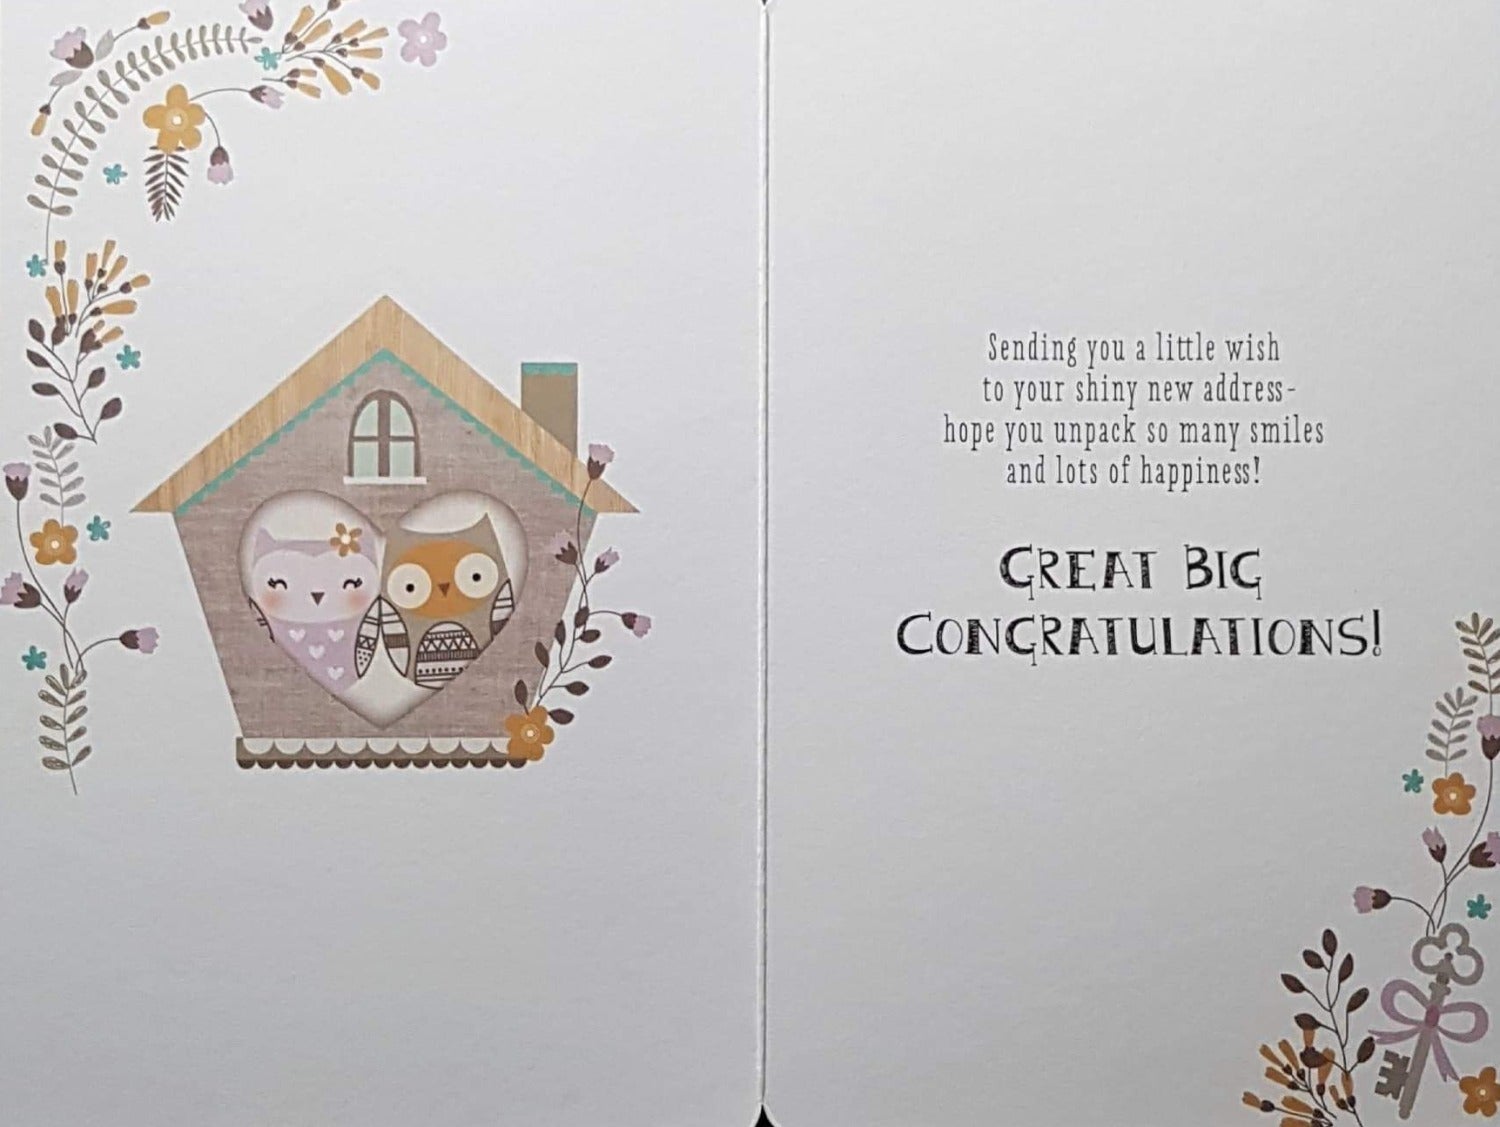 Congratulations Card - New Home / 'A New Place' & An Owl House